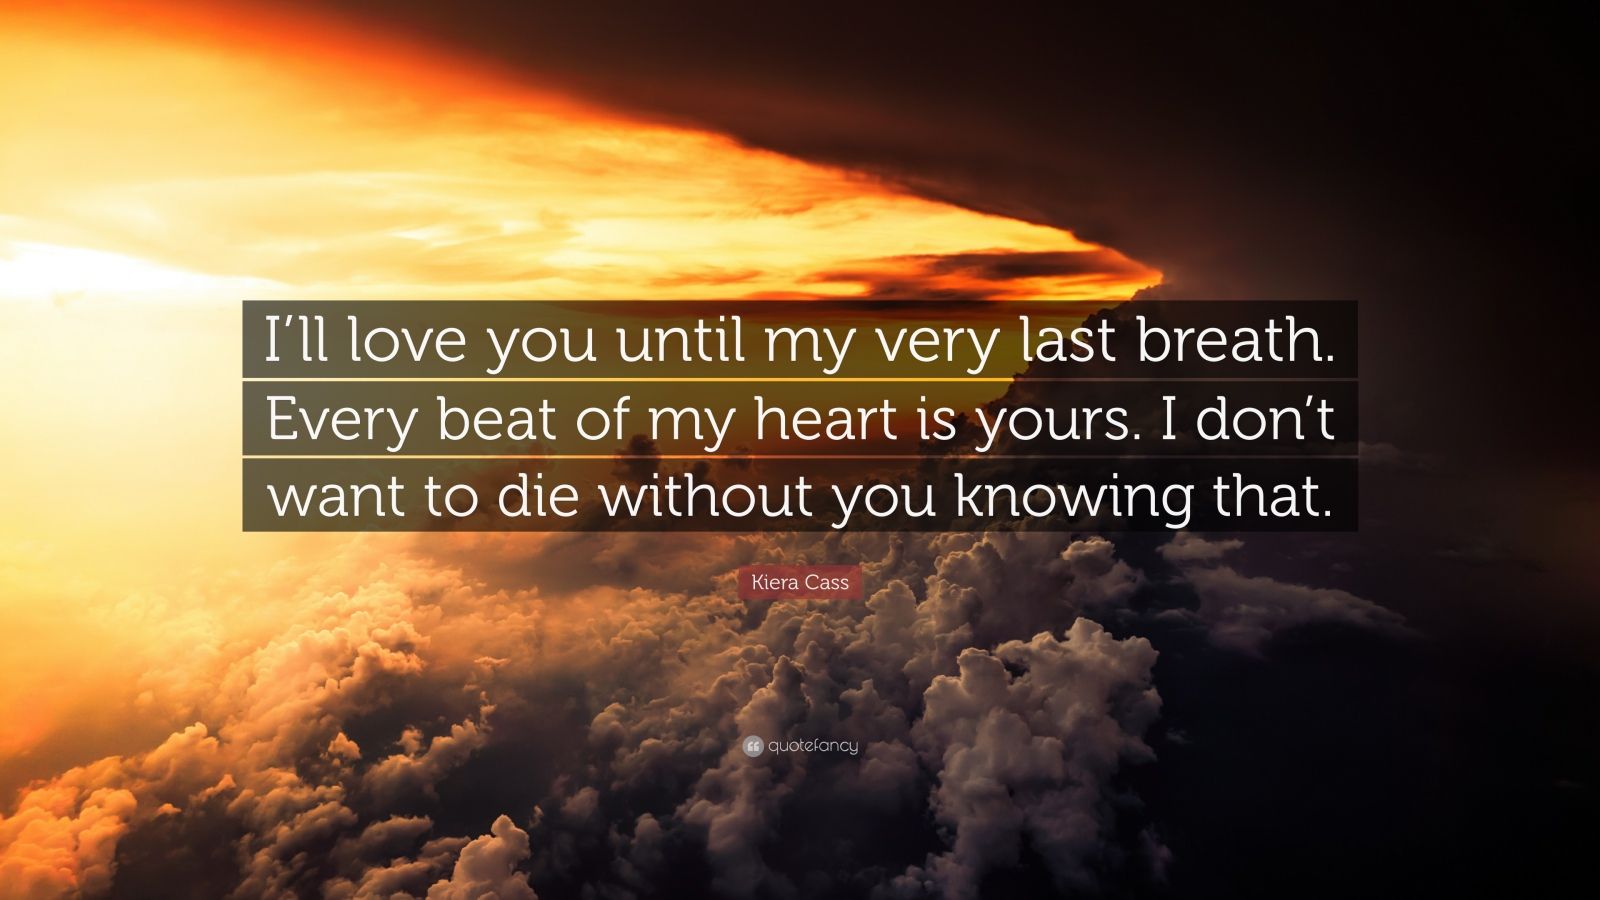 Kiera Cass Quote: "I'll love you until my very last breath. Every beat of my heart is yours. I ...